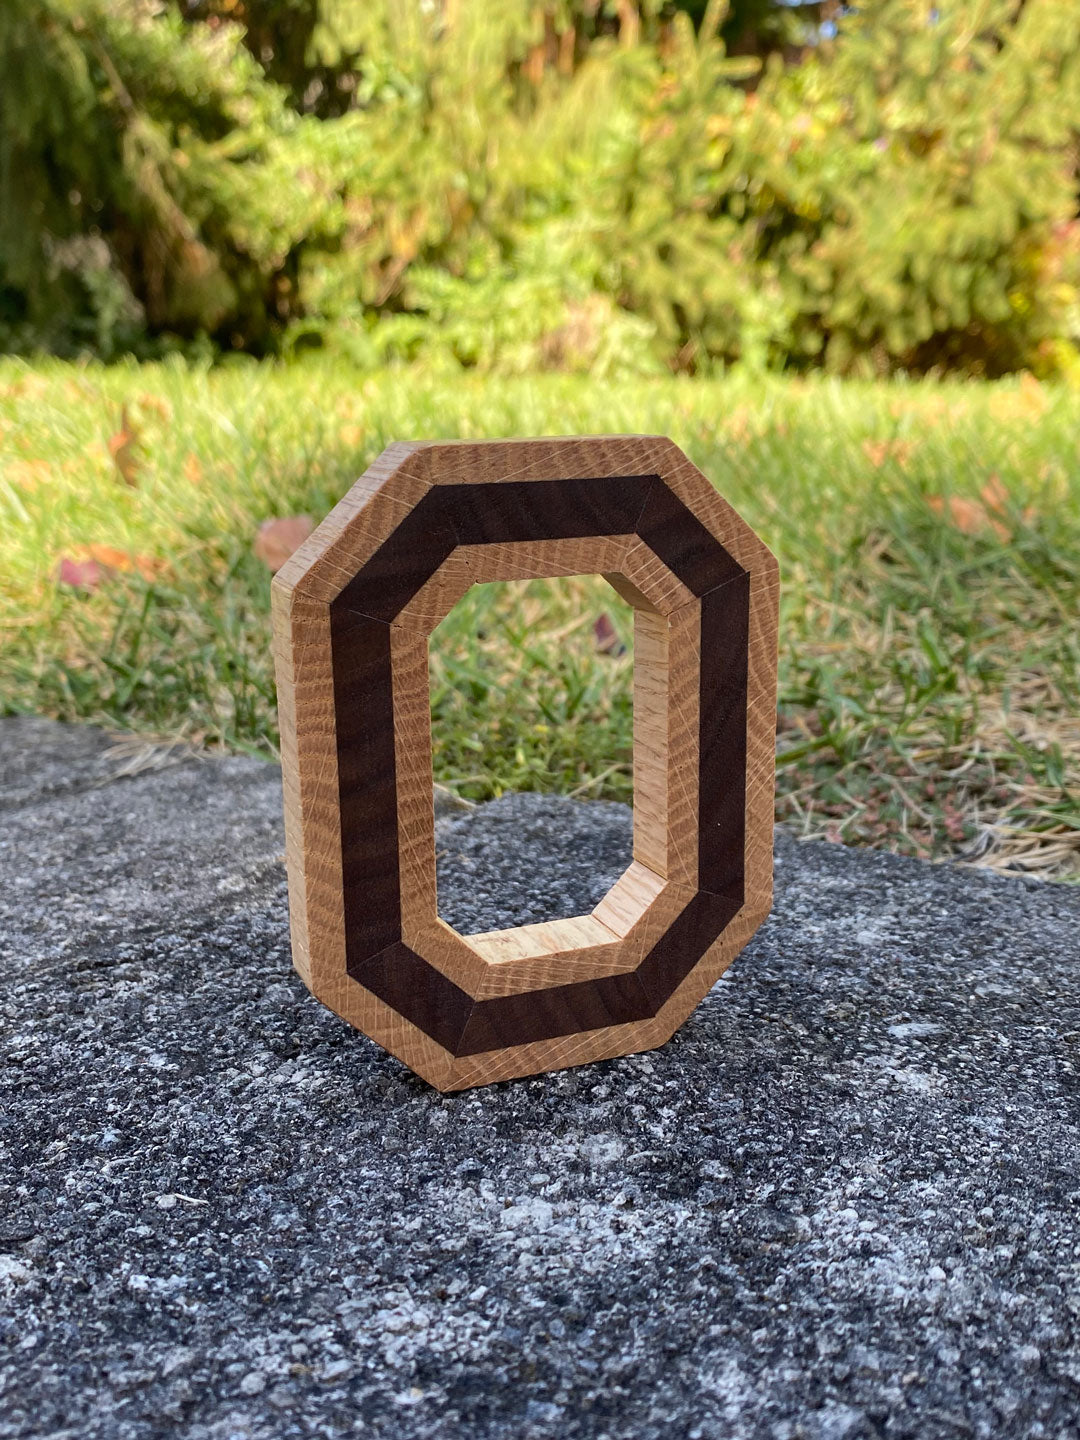 Freestanding handmade wood block O, with dark wood in the center. Set on a concrete background.